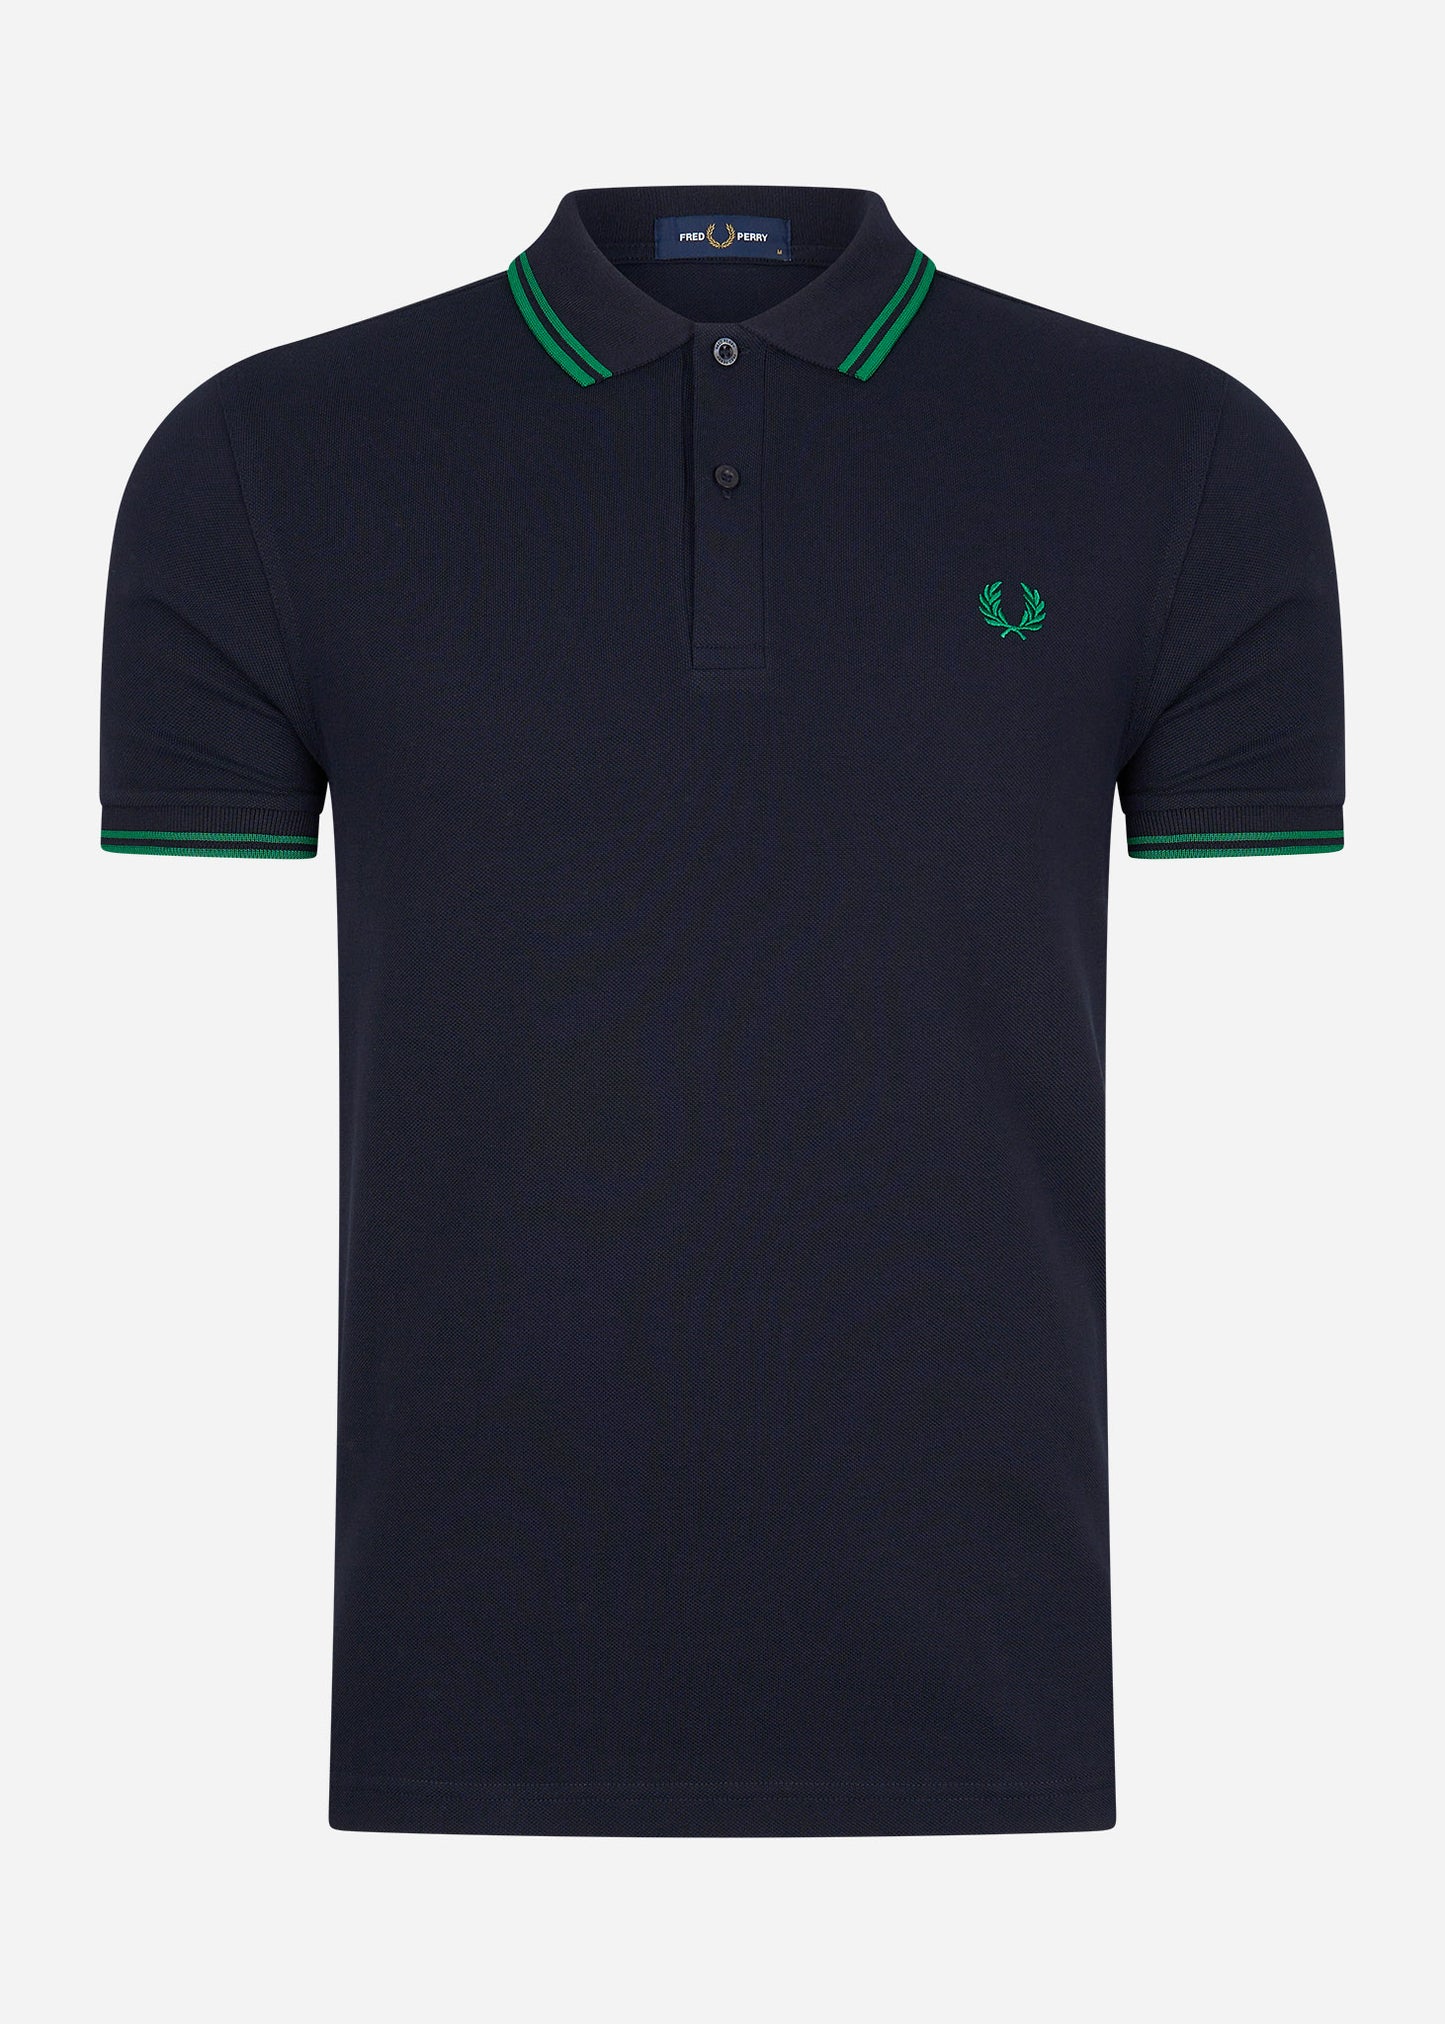 Twin tipped fred perry shirt - navy fp green